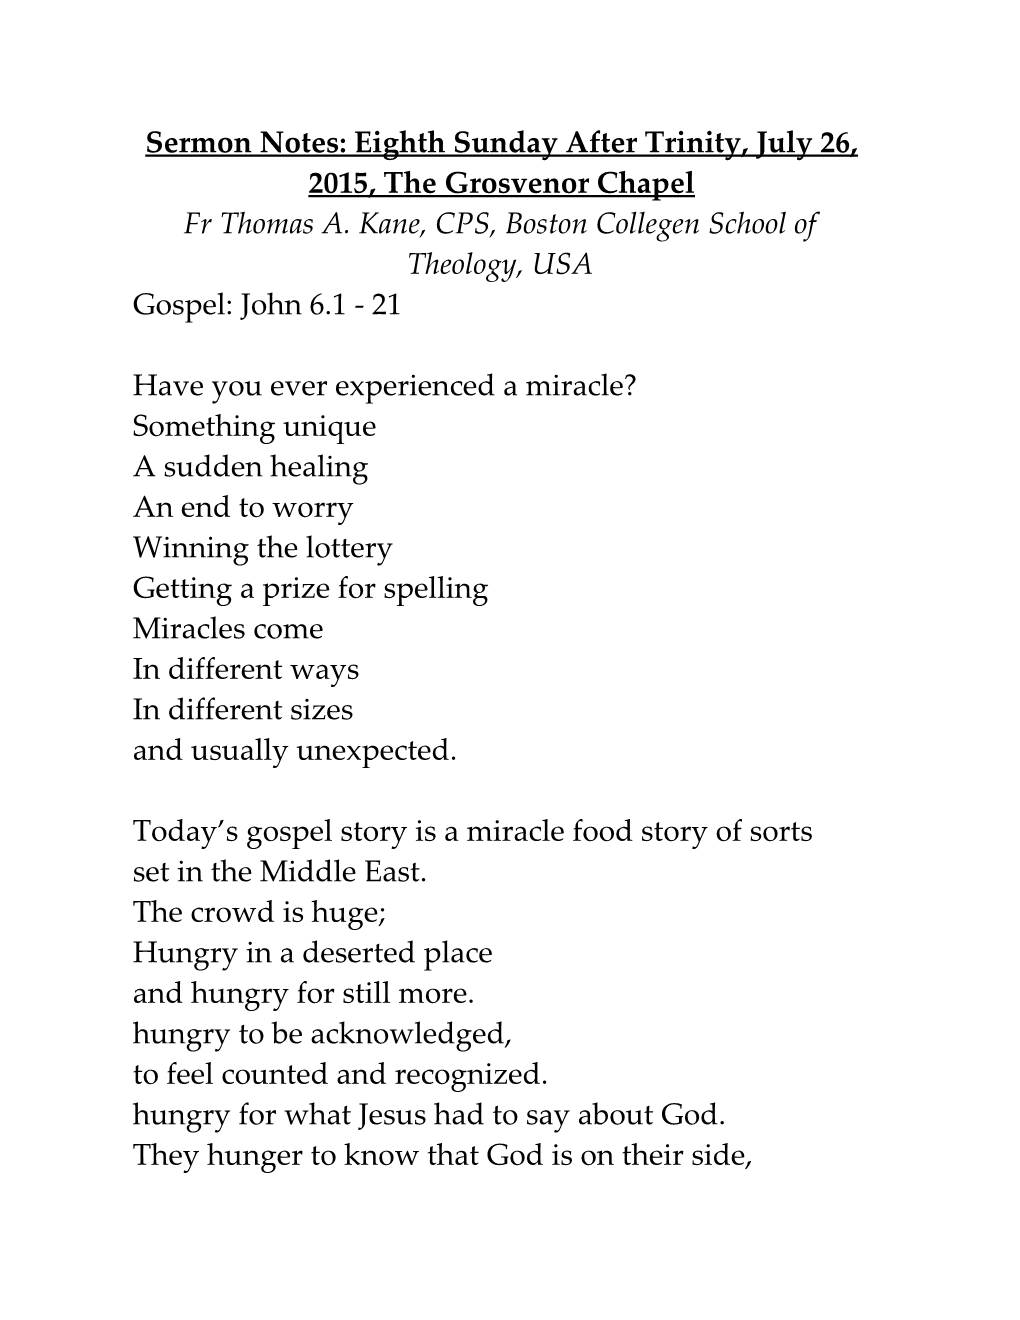 Sermon Notes: Eighth Sunday After Trinity, July 26, 2015, the Grosvenor Chapel